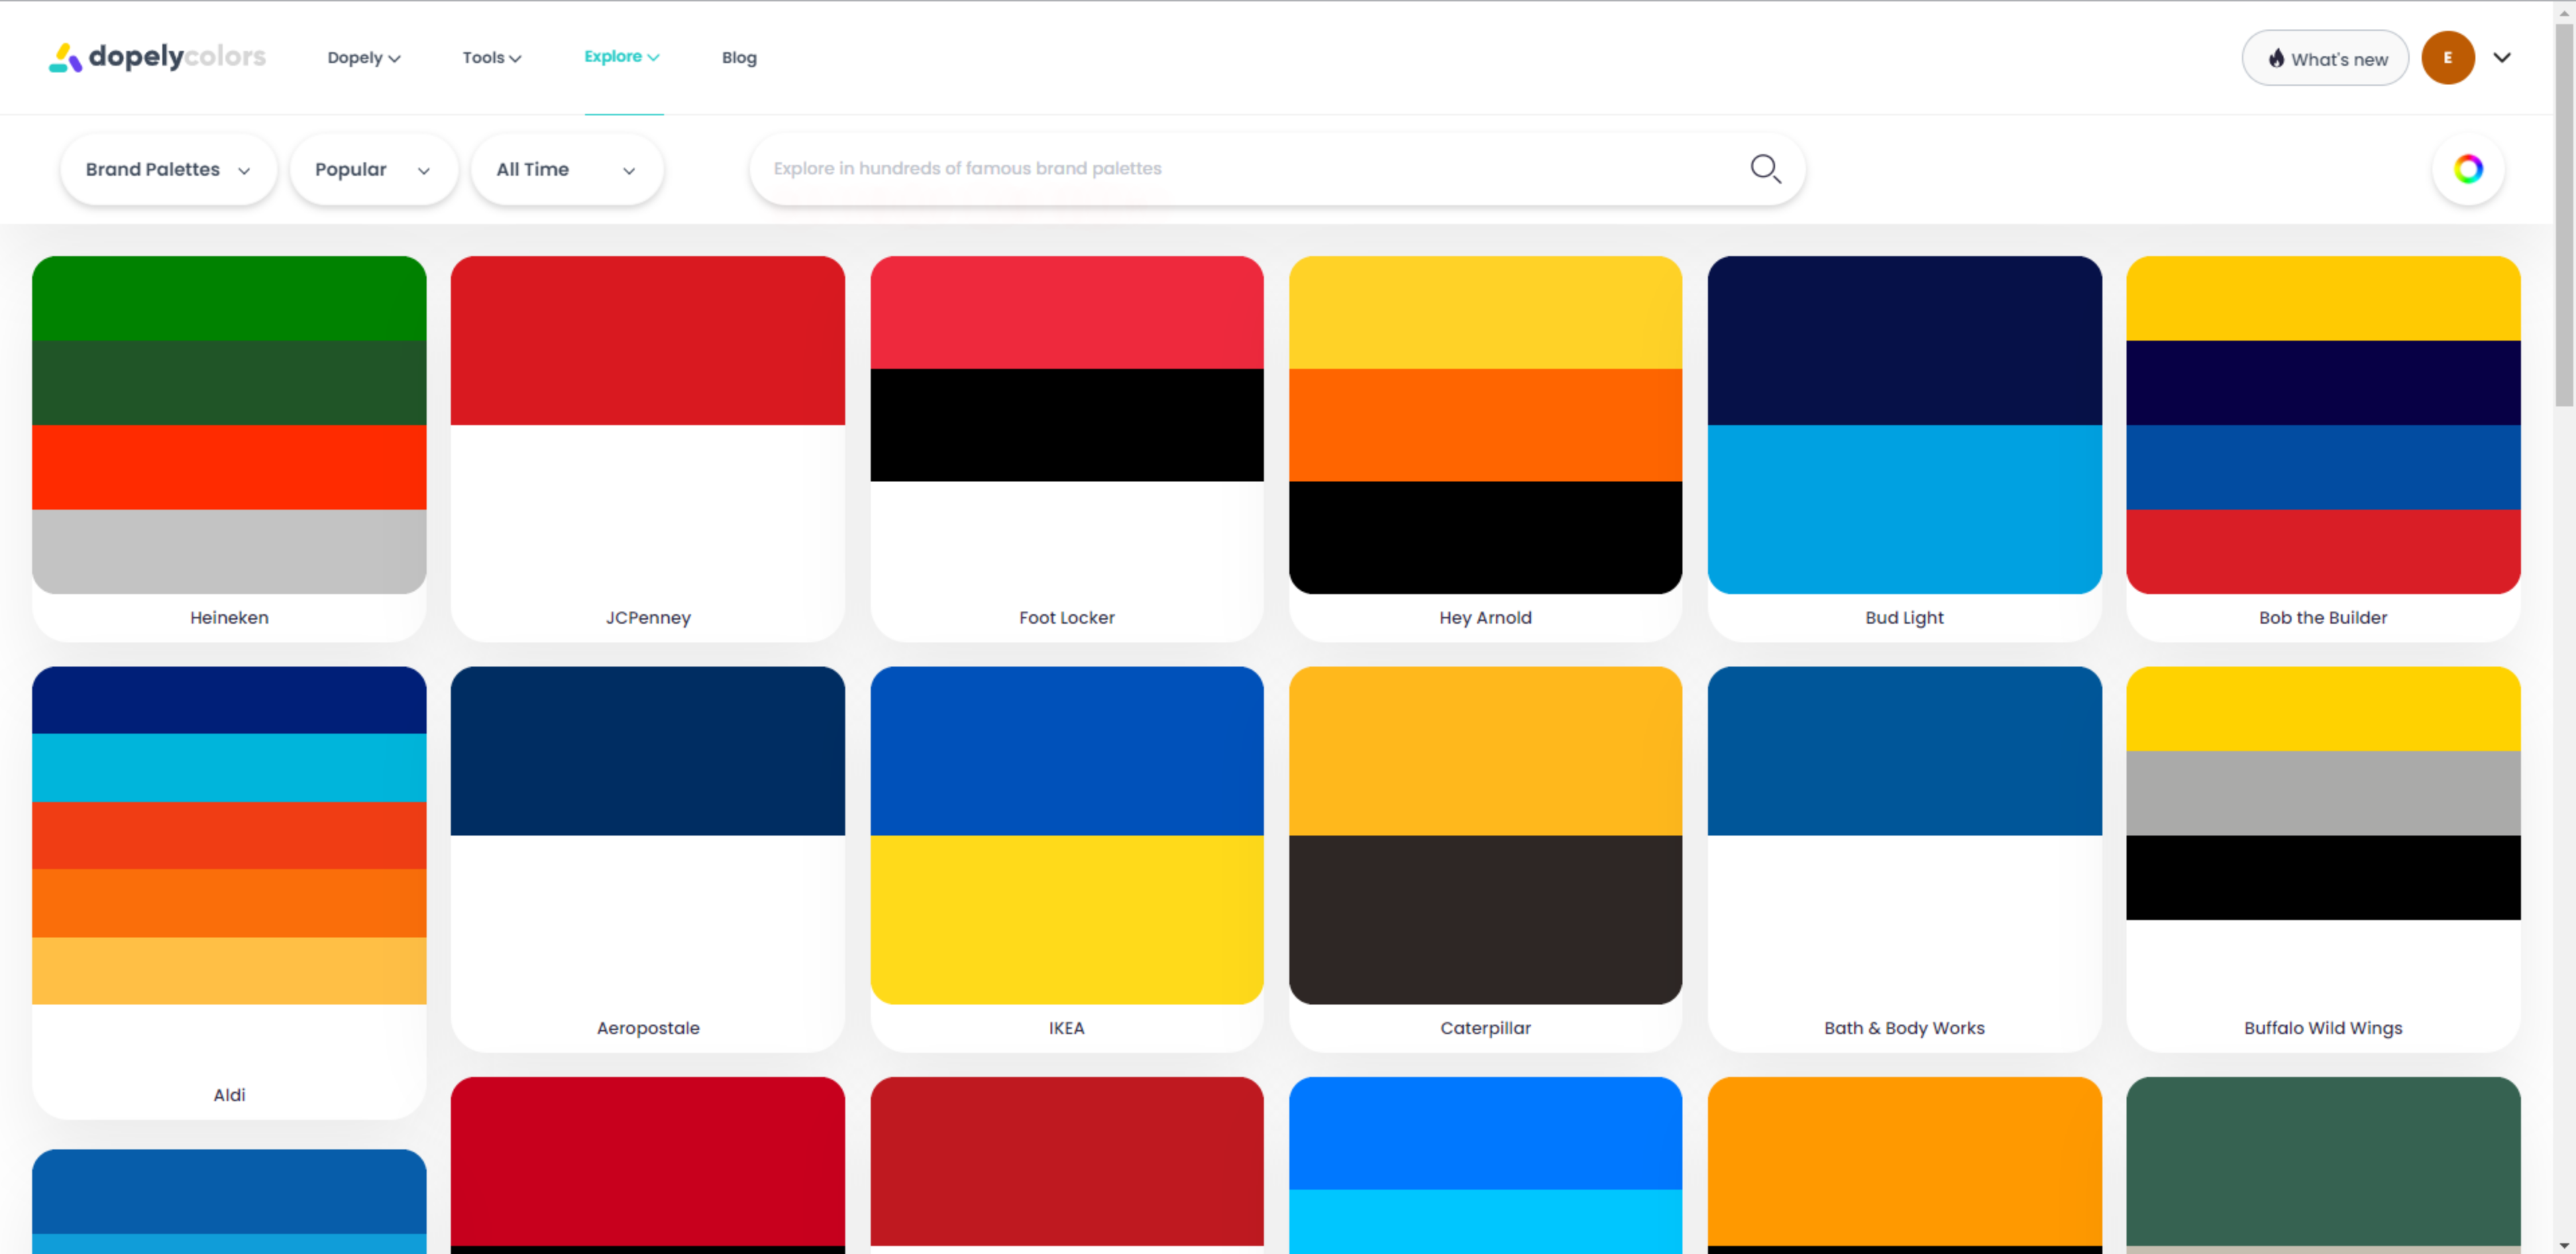 A picture from Brand palette explore in dopley colors web app with so many palettes from famous brands in 3 lines and each line has 6 palettes. The image has eighteen color palettes and a search tool.